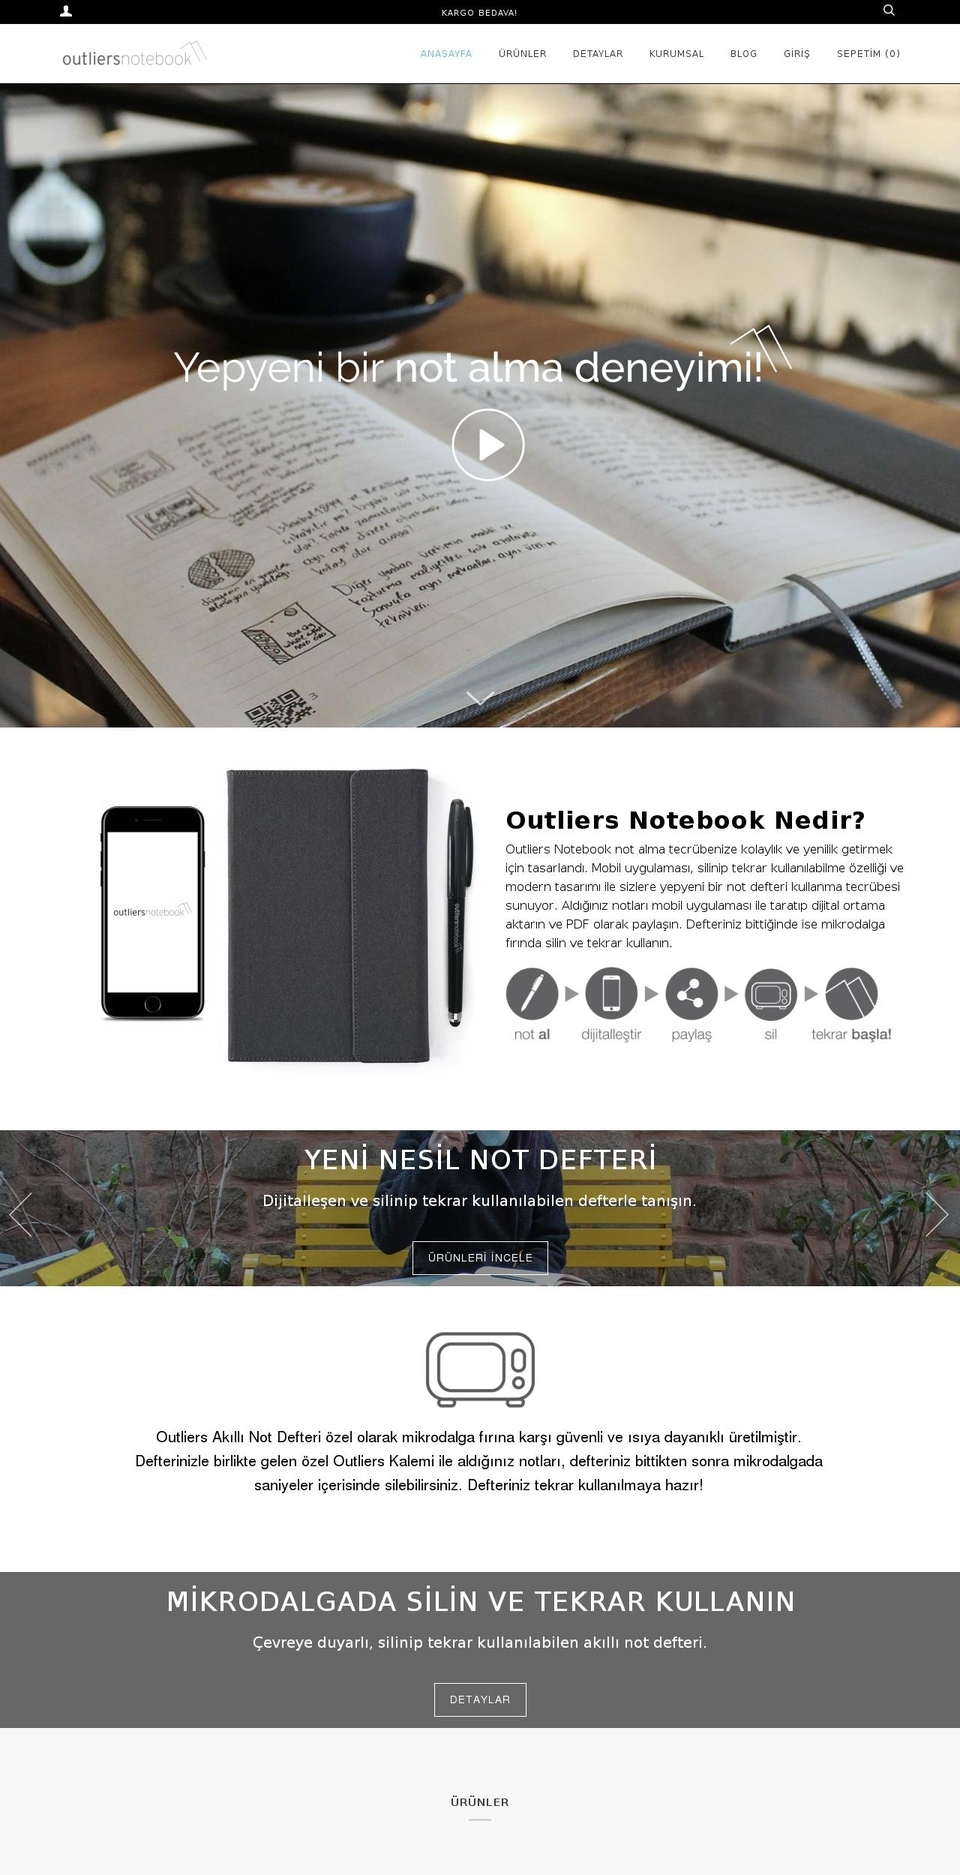 Copy of Pipeline Shopify theme site example outliersnotebook.com.tr